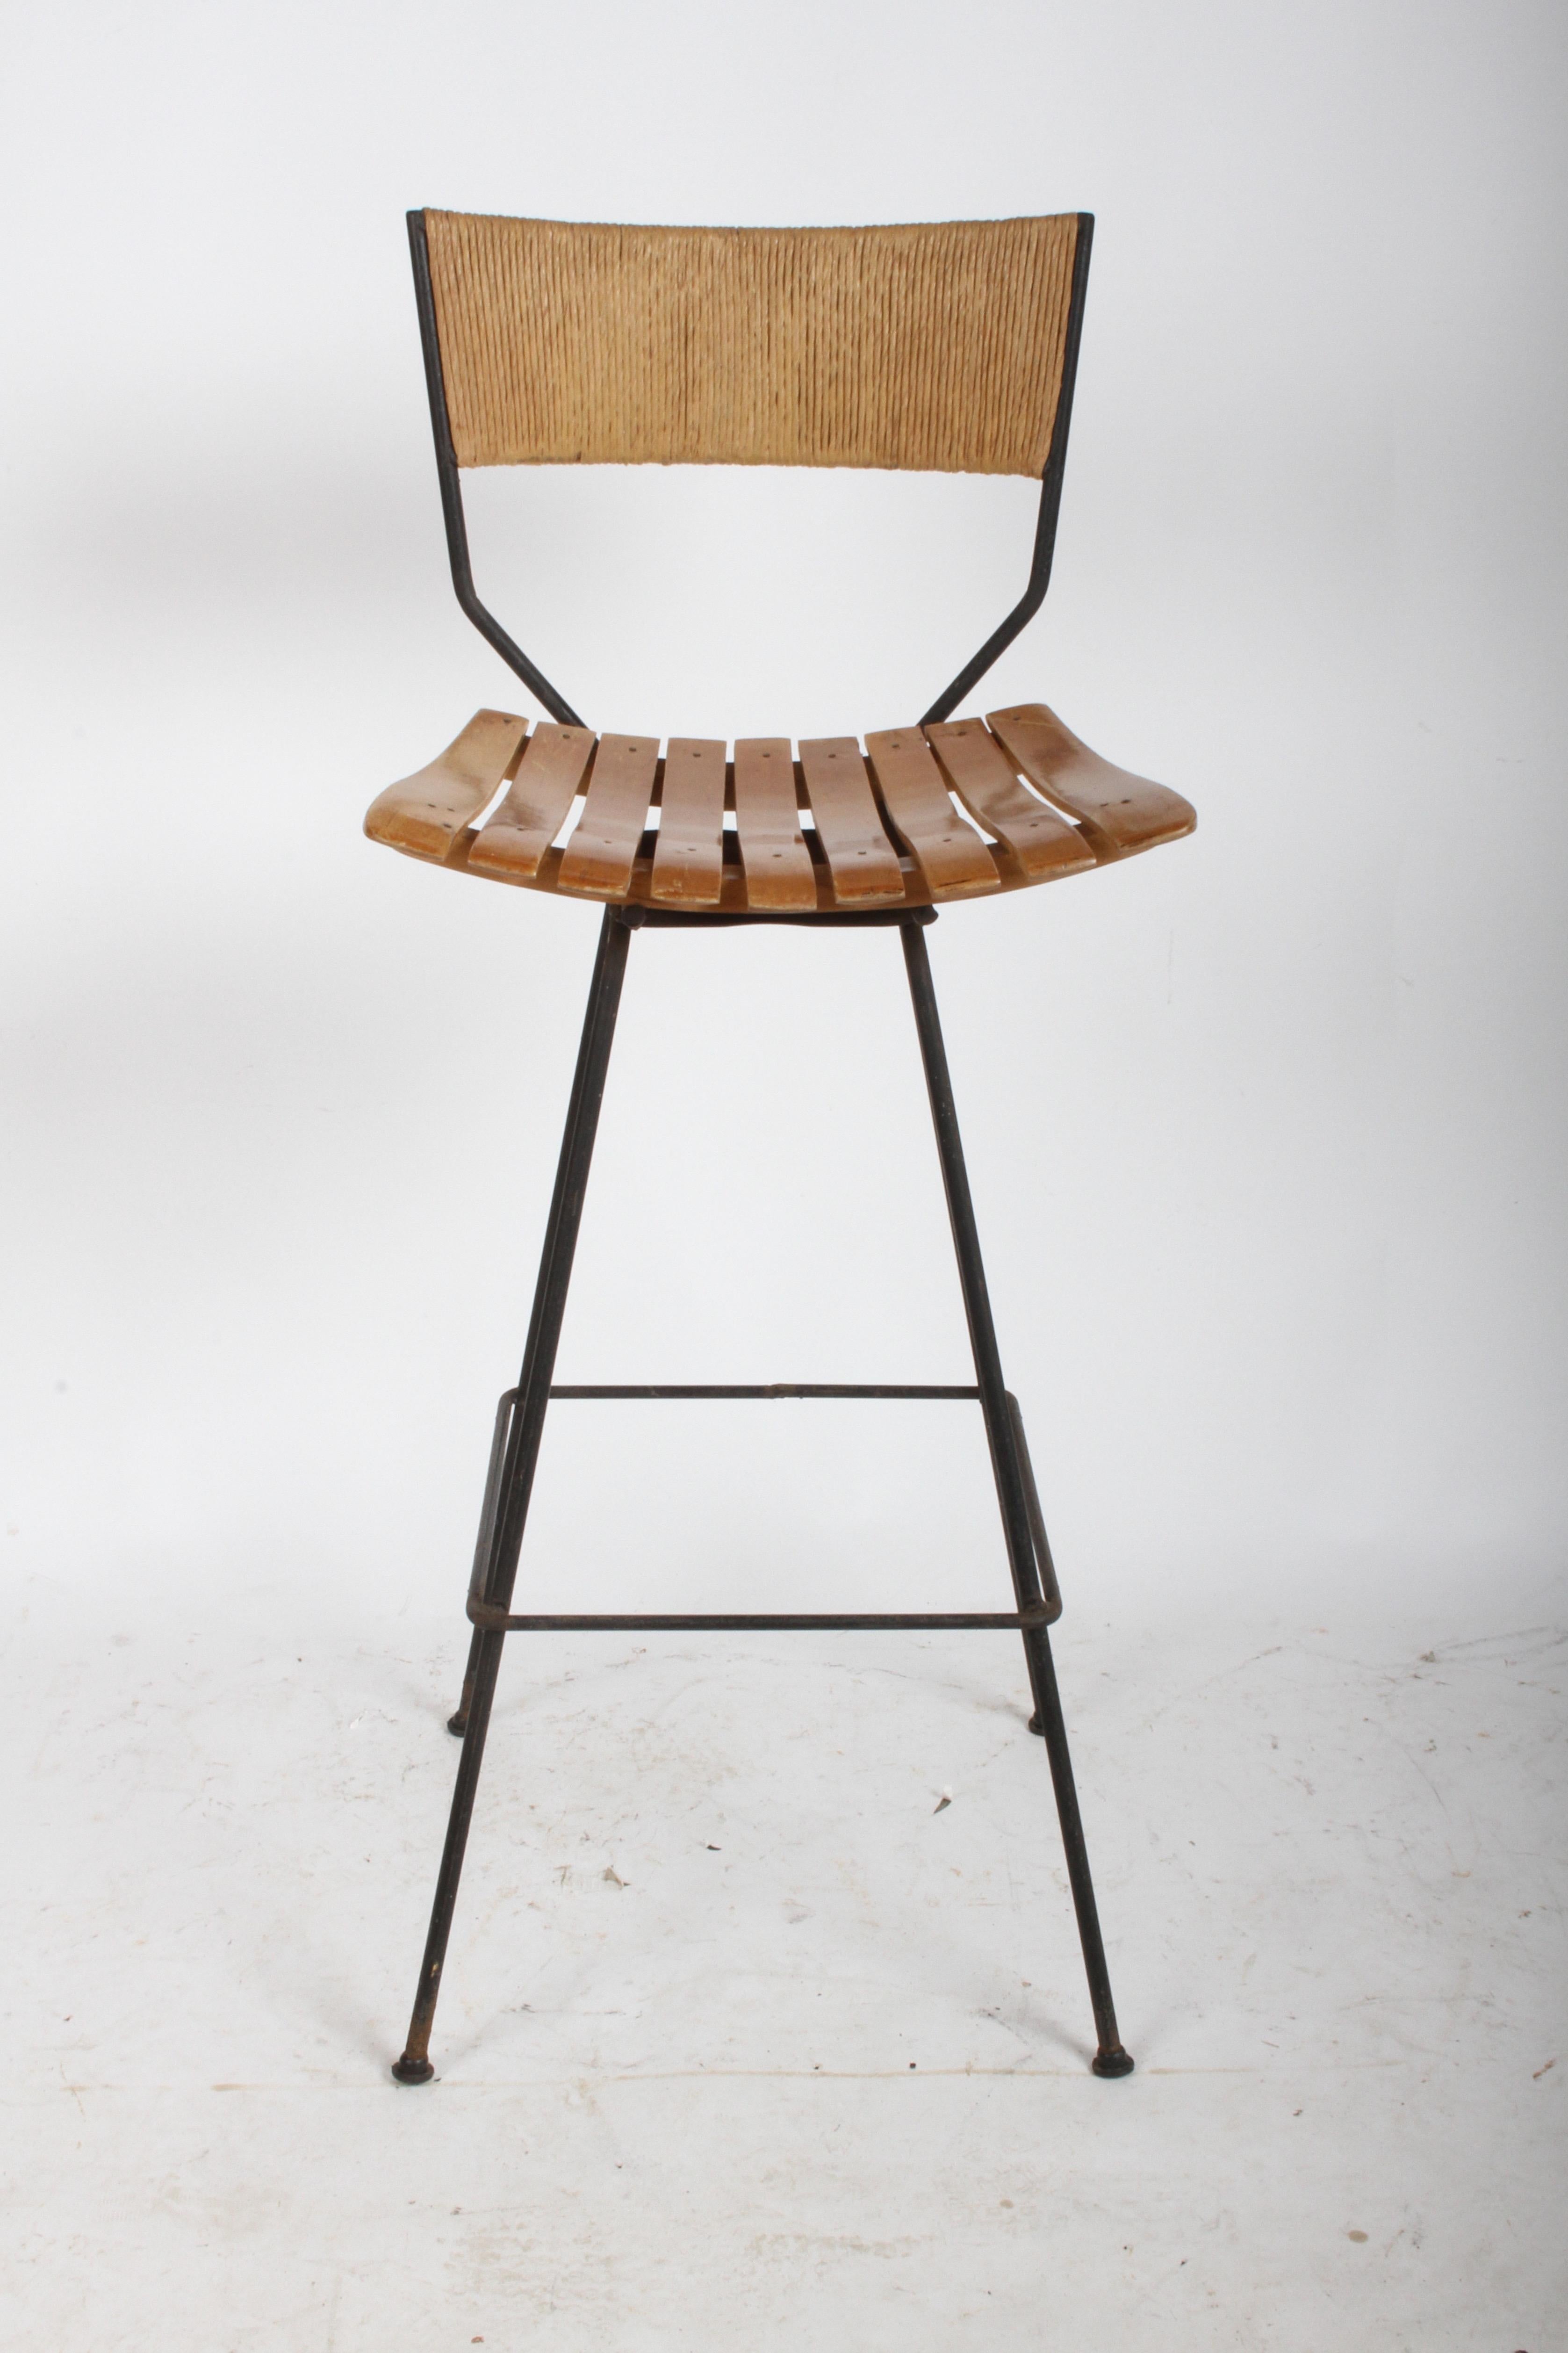 Single Arthur Umanoff swivel bar stool, wood slat seat, iron frame with Danish rush cord wrapped back. If you need another stool to complete your set, here is one that is left unrestored, so you can match. Frame retains original glides, some rust to